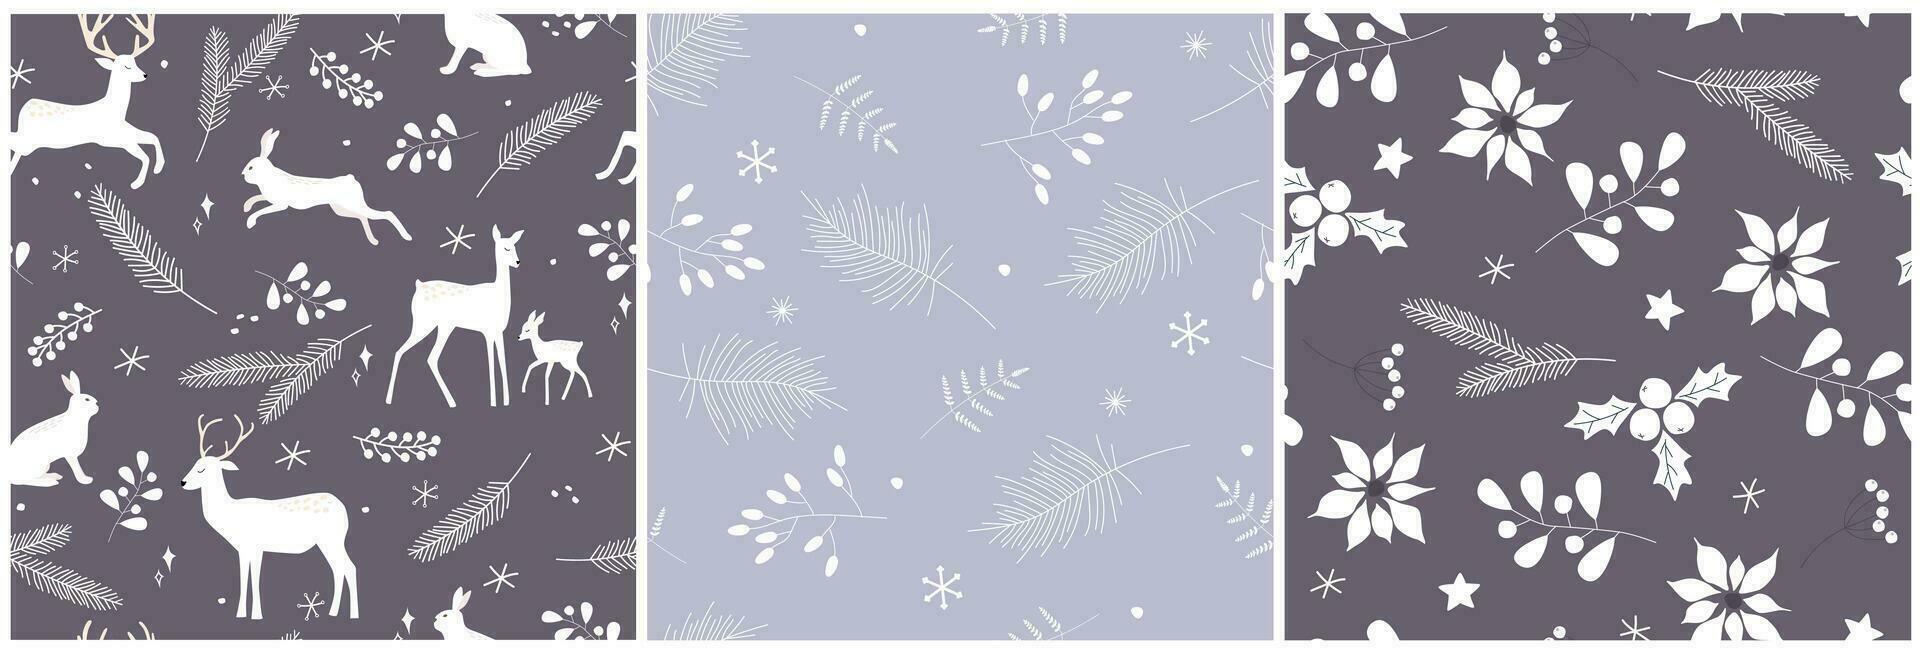 Set of seamless patterns with winter natural abstract ornament. Silhouettes of animals, snowflakes, fir trees, poinsettias. Monochrome vector graphics.